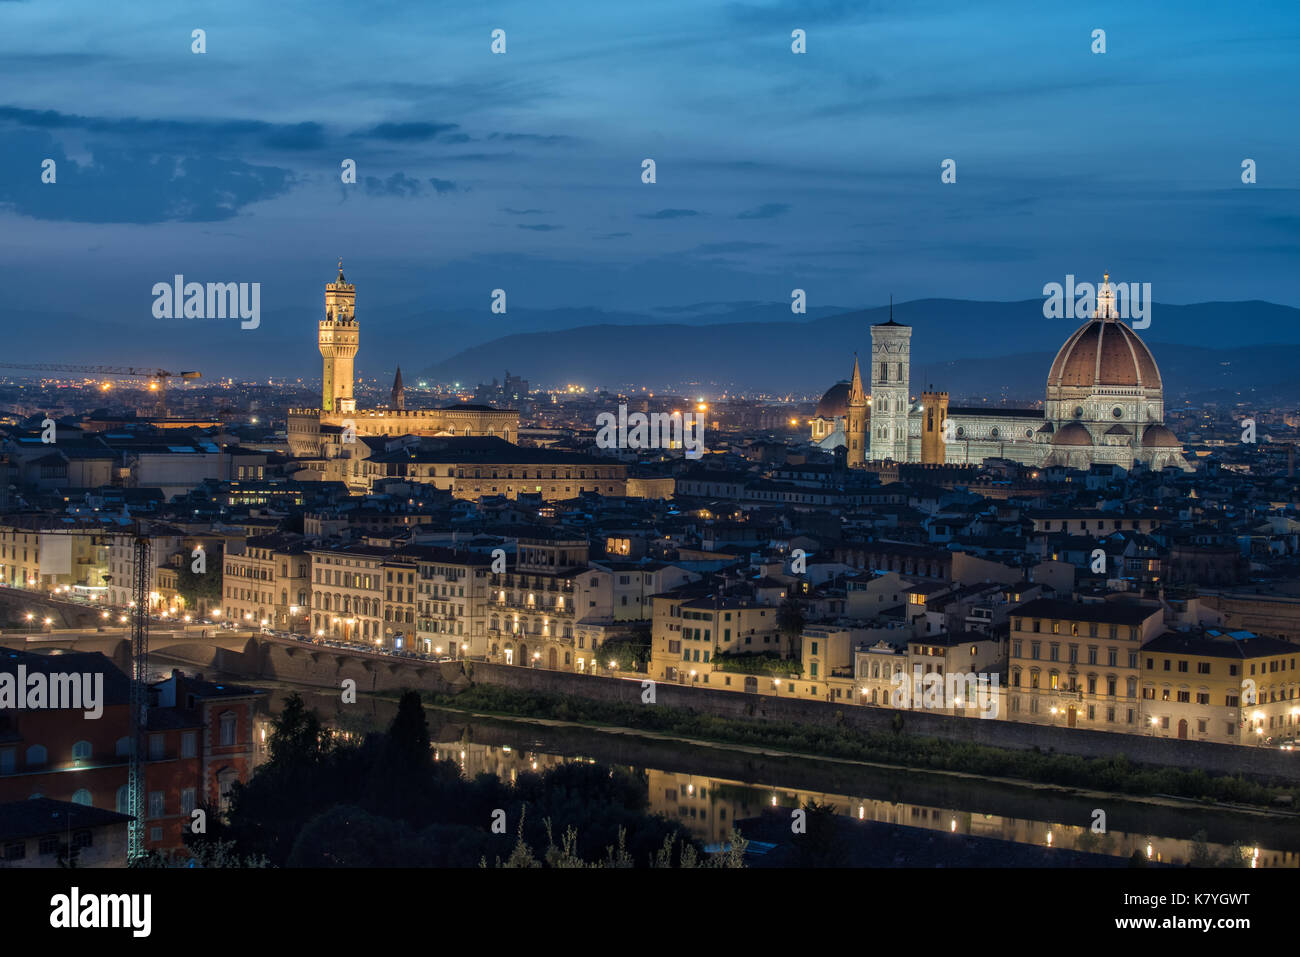 Aerial view of river Arno and Florence by night from Piazzale Michelangelo. Florence is one of the major tourist destinations in Italy. Stock Photo